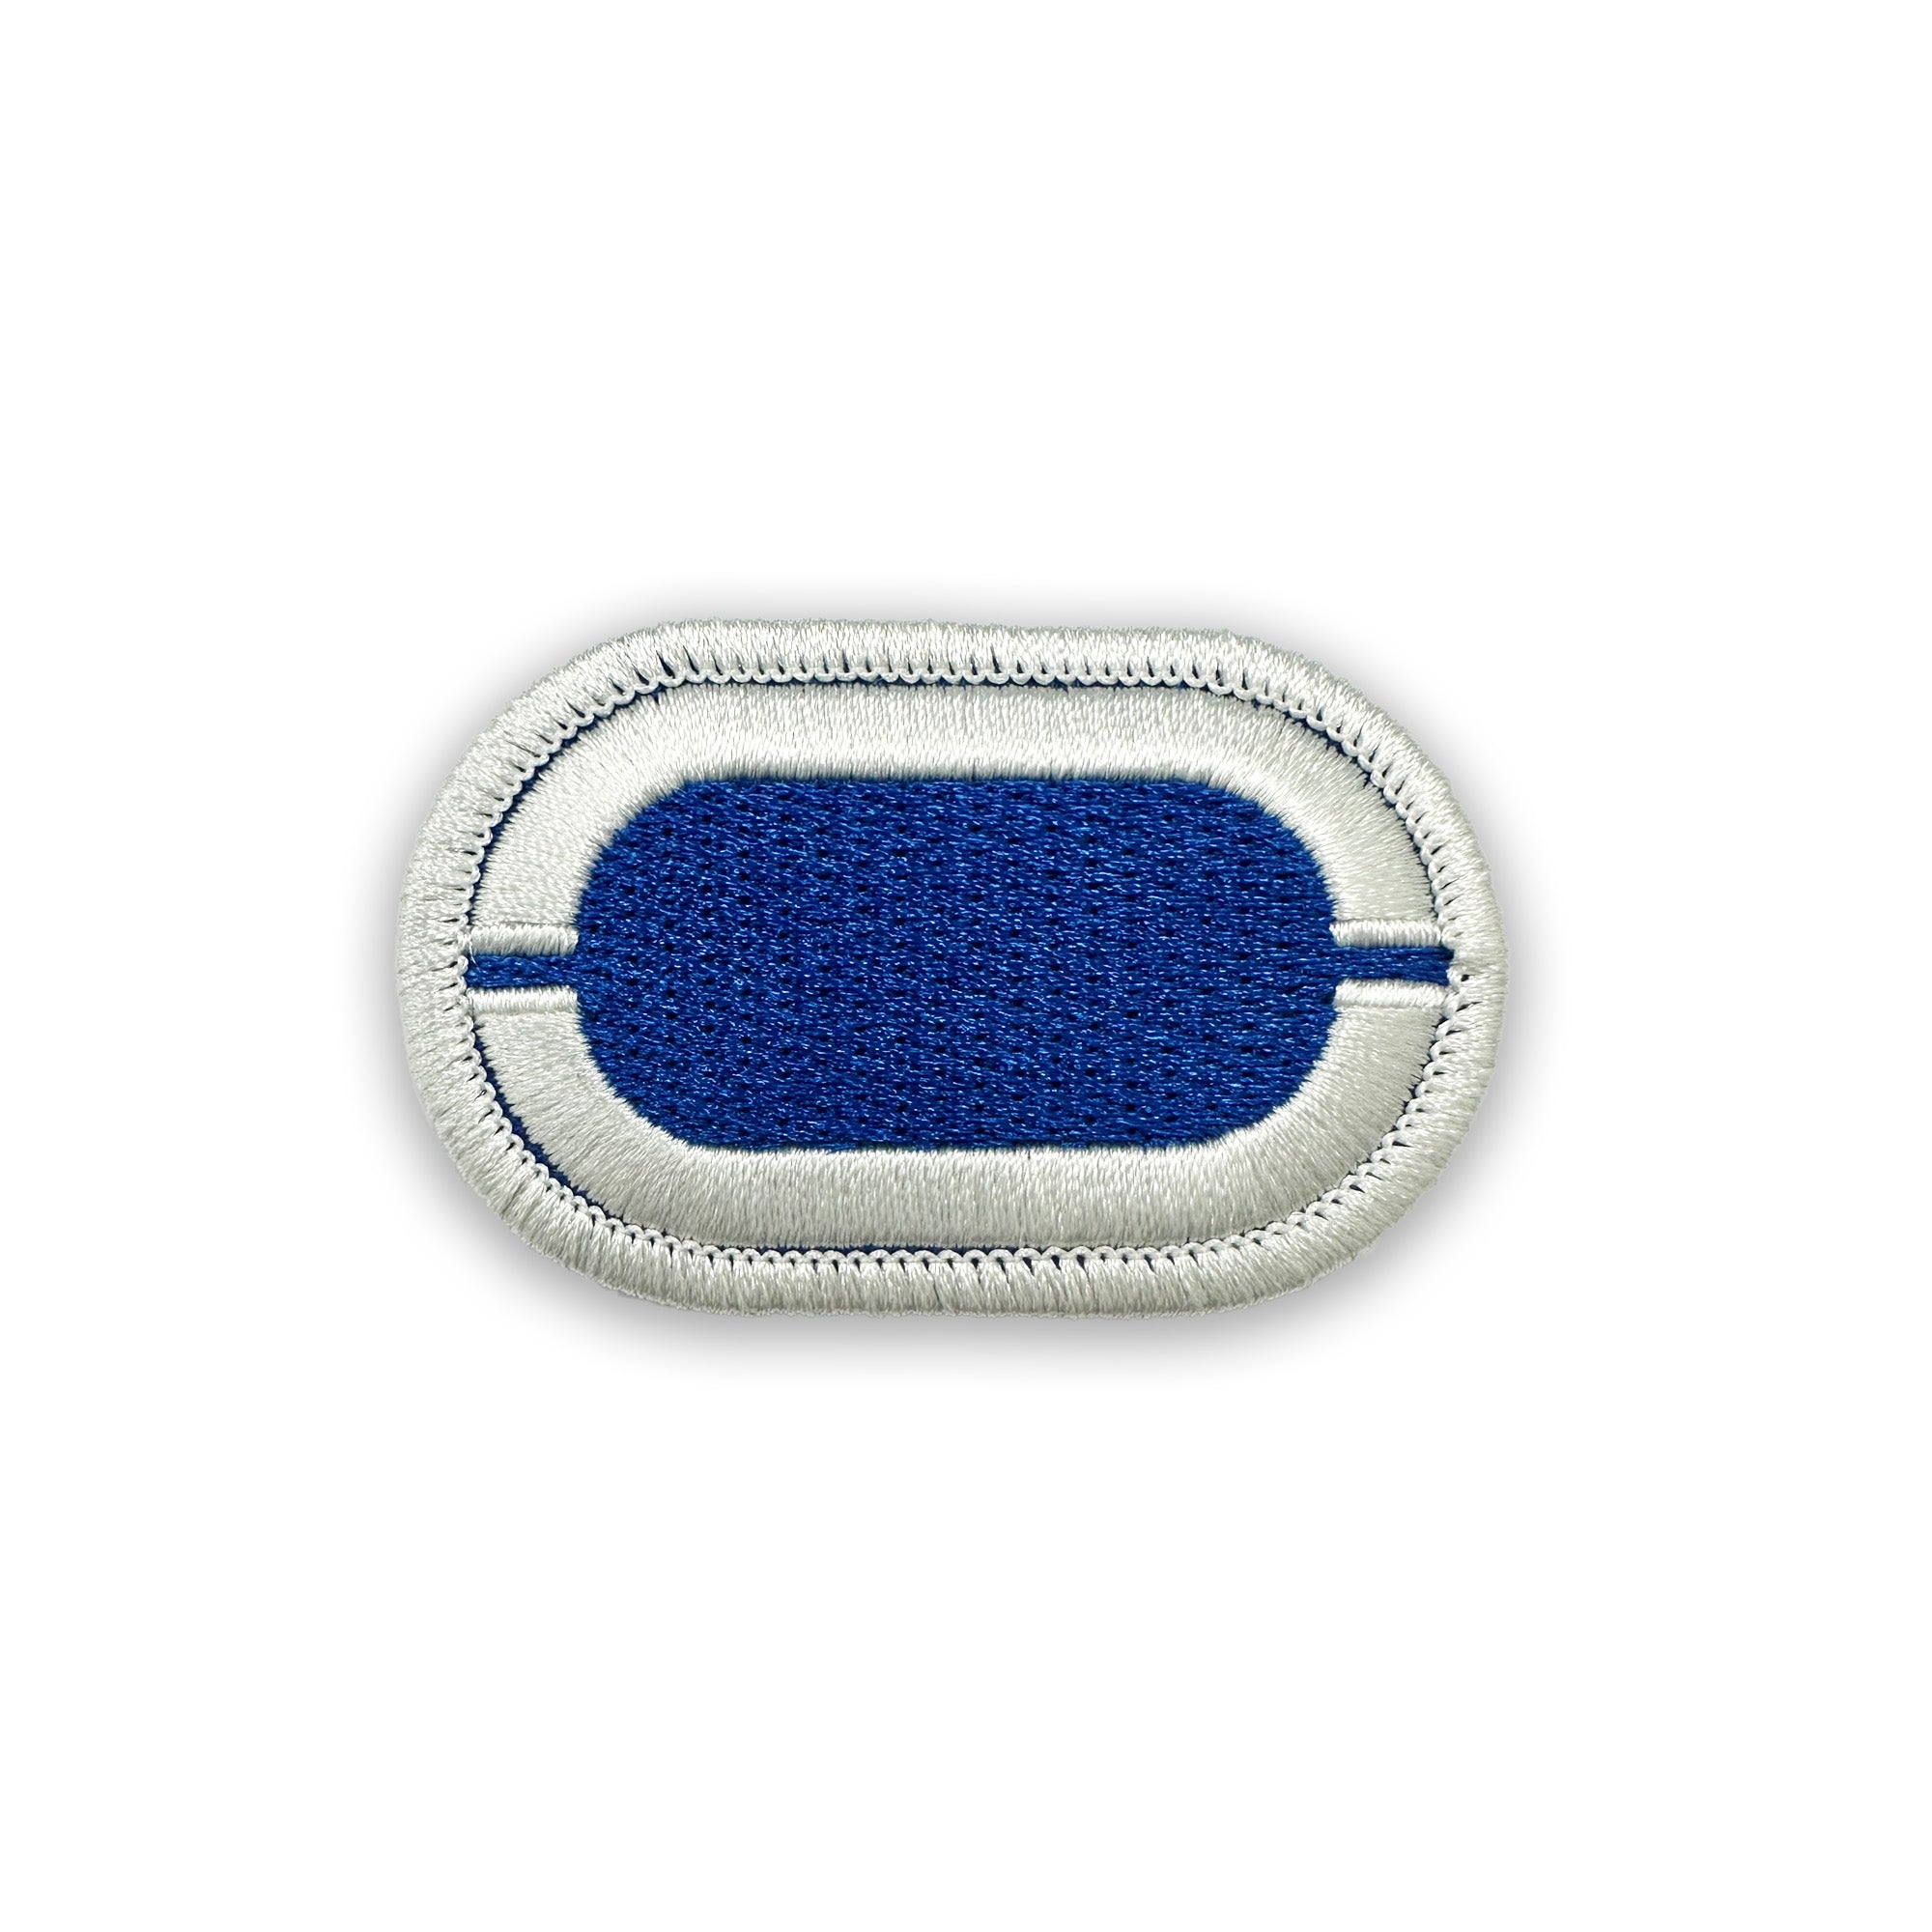 325th Infantry 1st Battalion Oval (each).